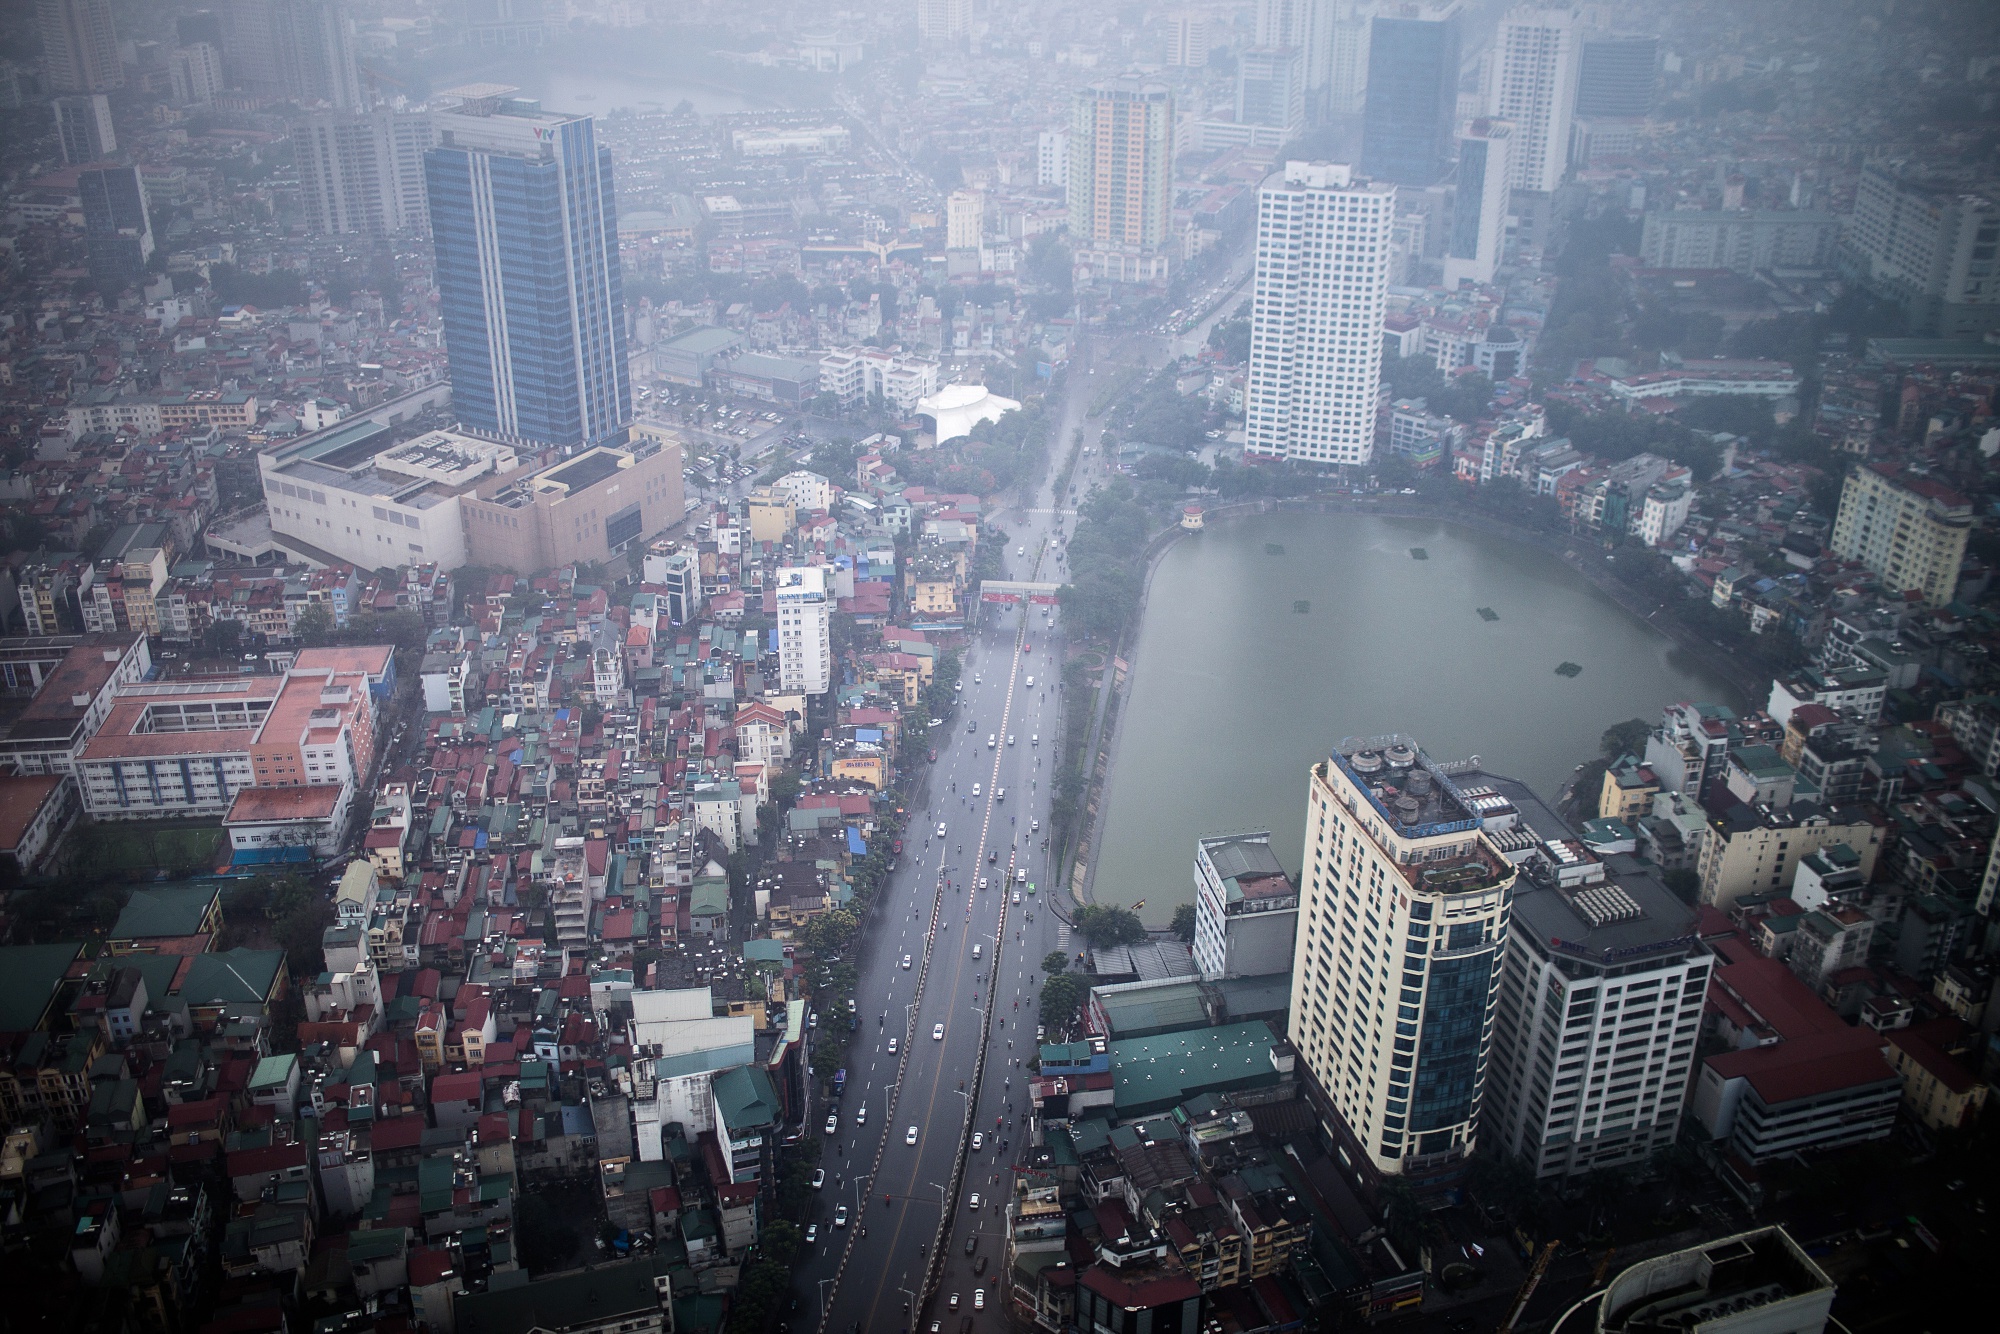 Vehicles travel&nbsp;along a road past buildings seen from the glass-bottomed observation deck of Lotte Center in Hanoi, Vietnam.